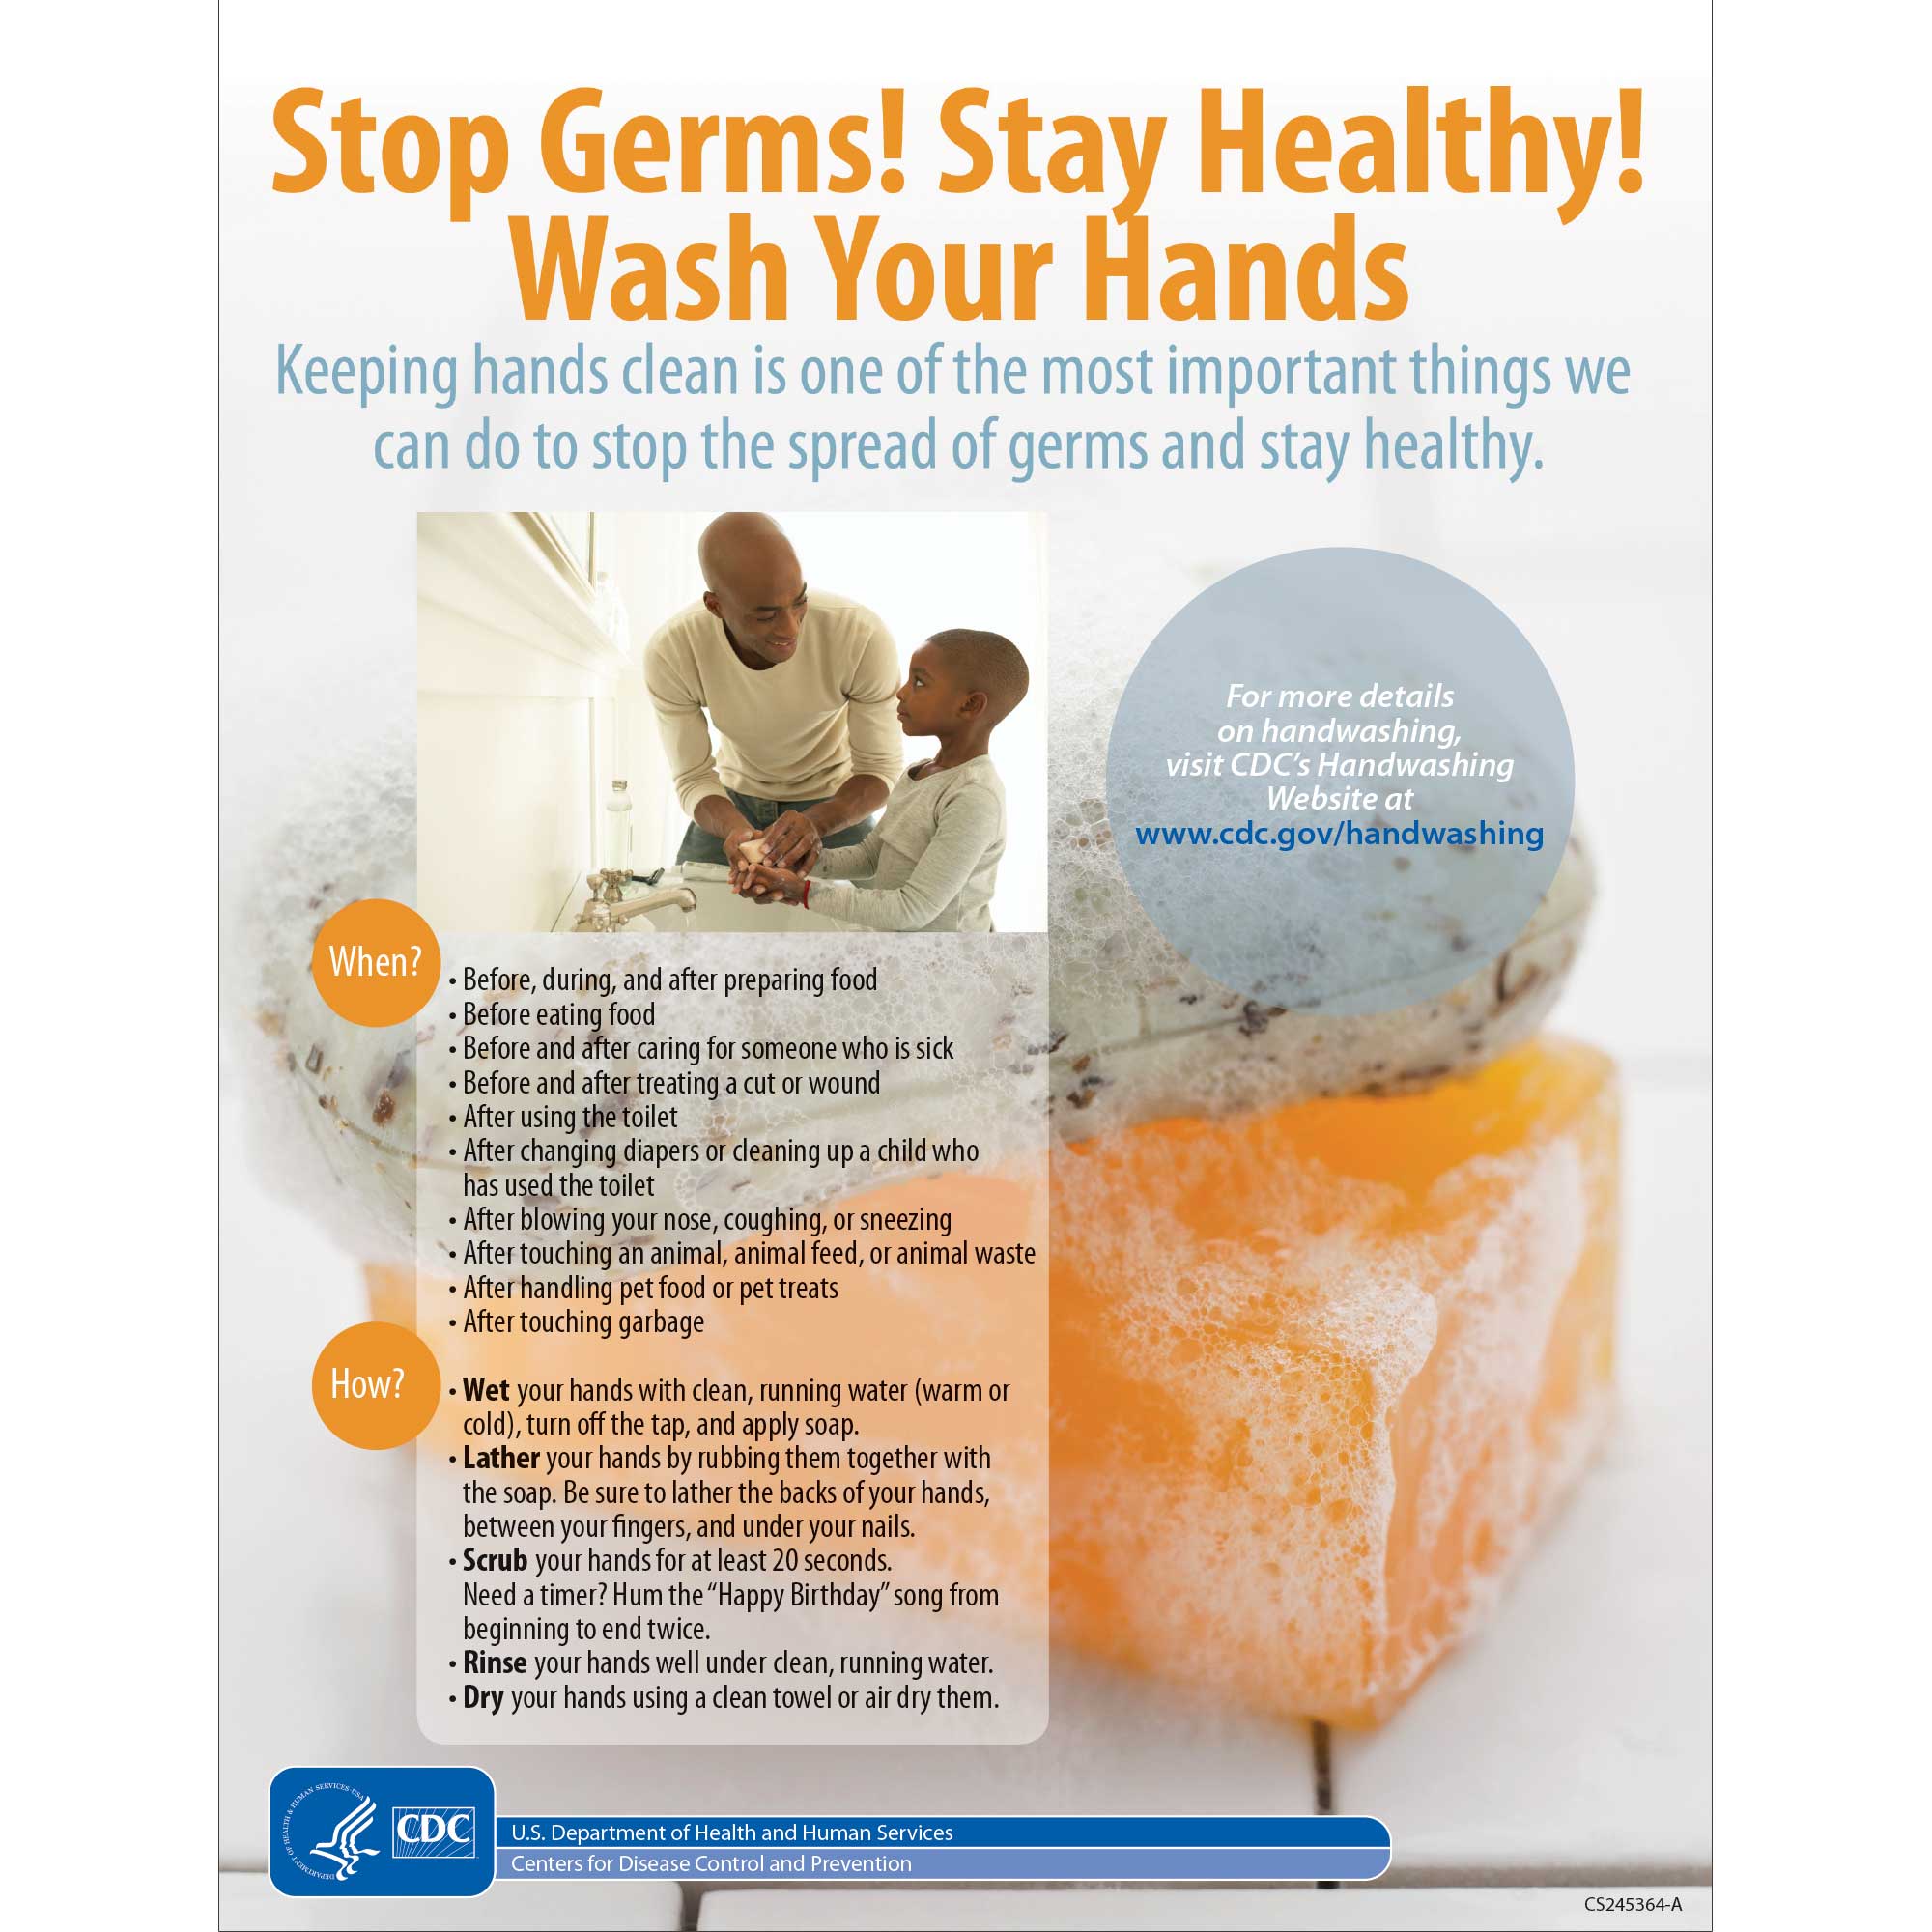 cdc-stop-germs-stay-healthy-wash-hands-poster-plum-grove